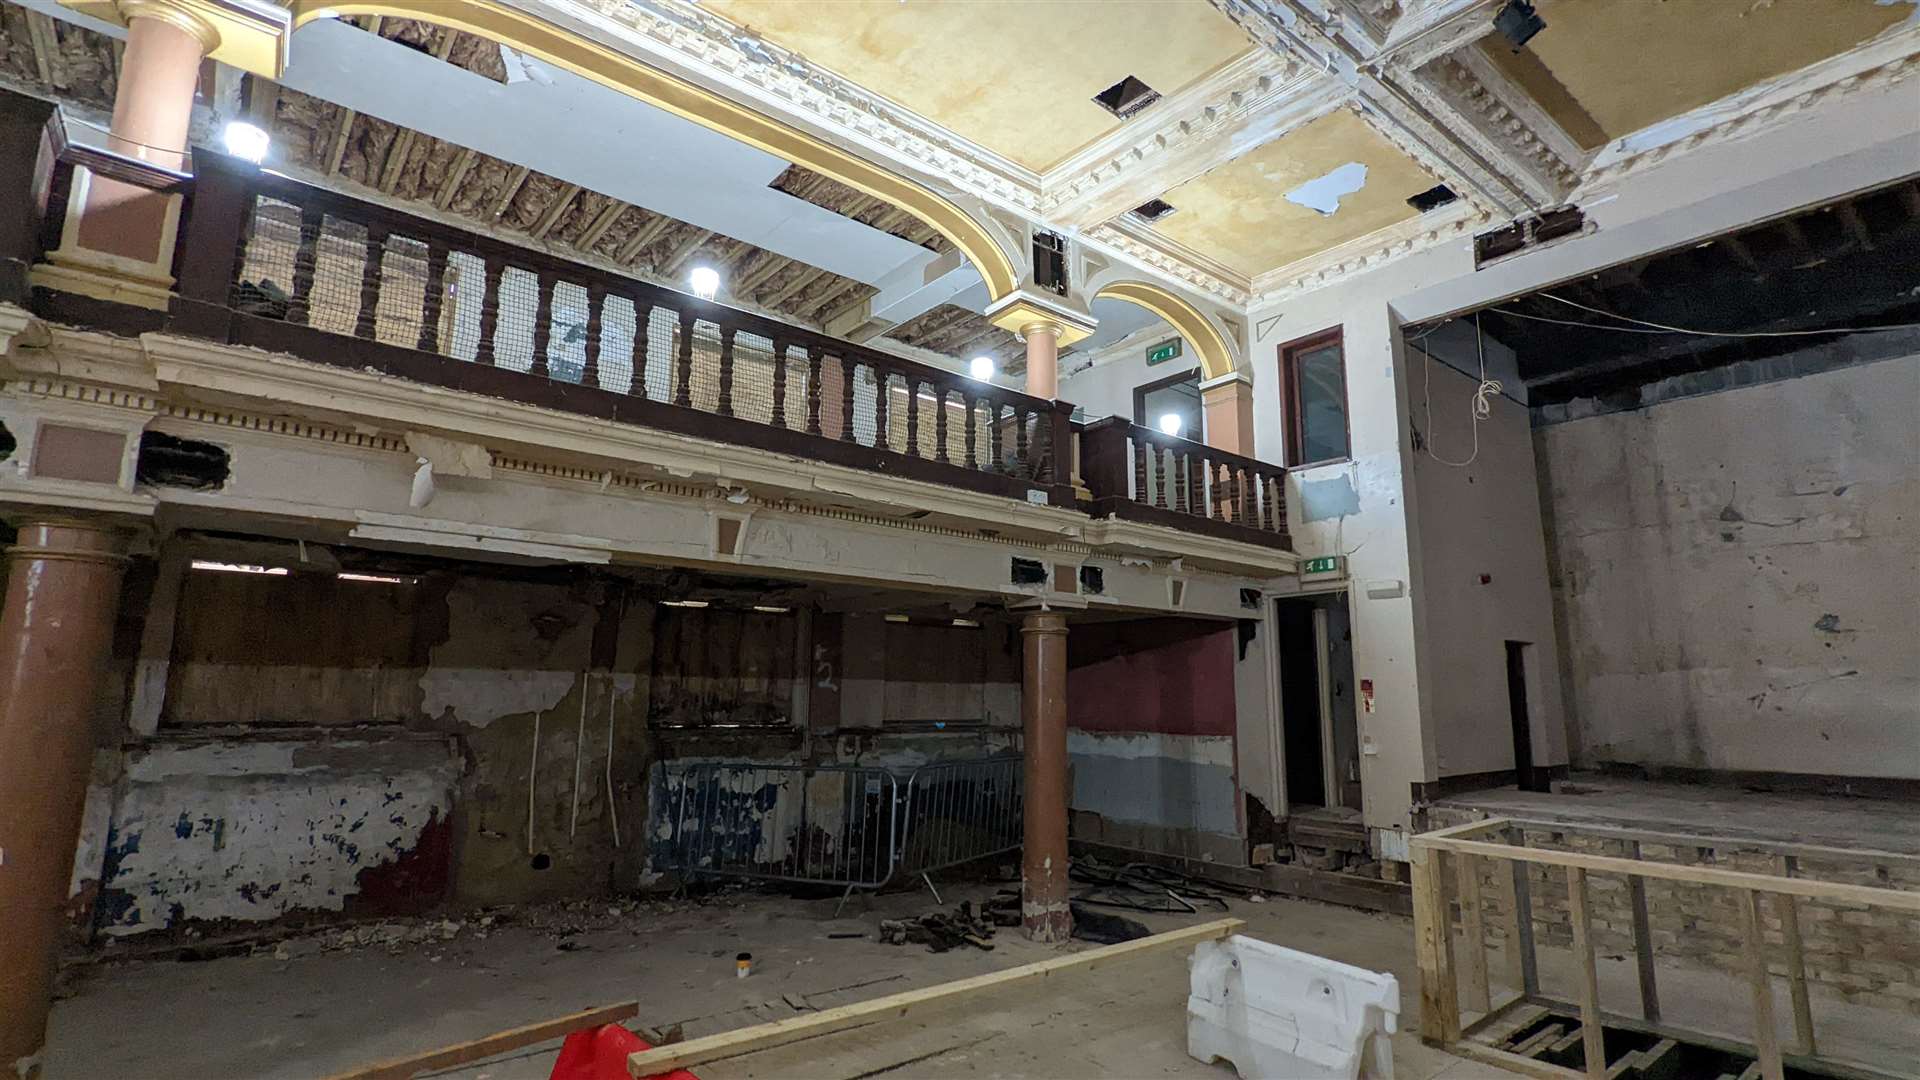 The mezzanine floor is reportedly set to be removed during the works